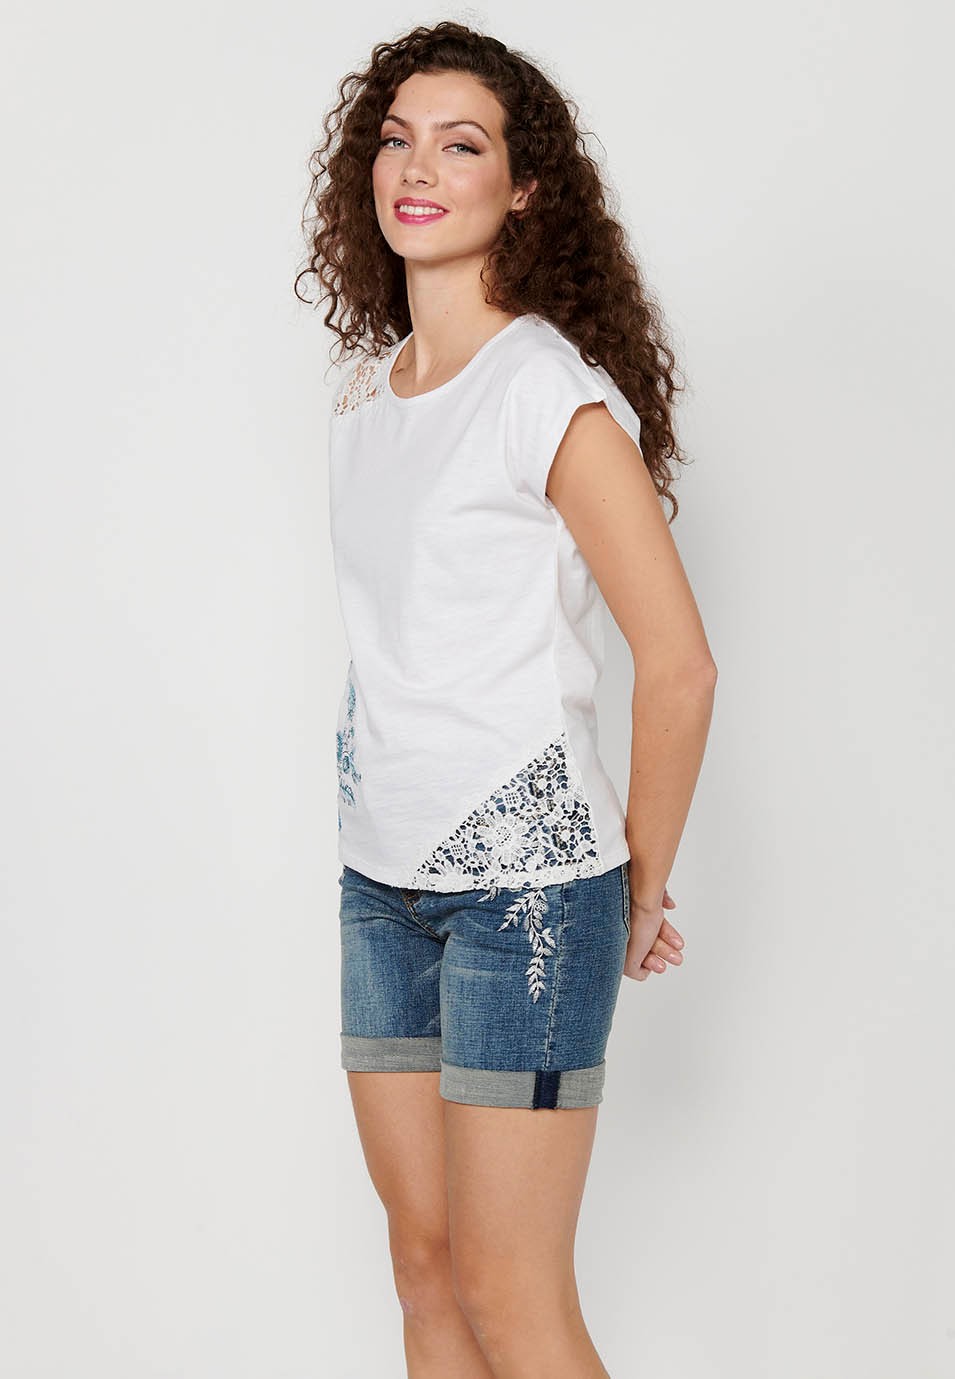 Short-sleeved T-shirt Cotton Top with Round Neck and Front Floral Embroidery in White for Women 5